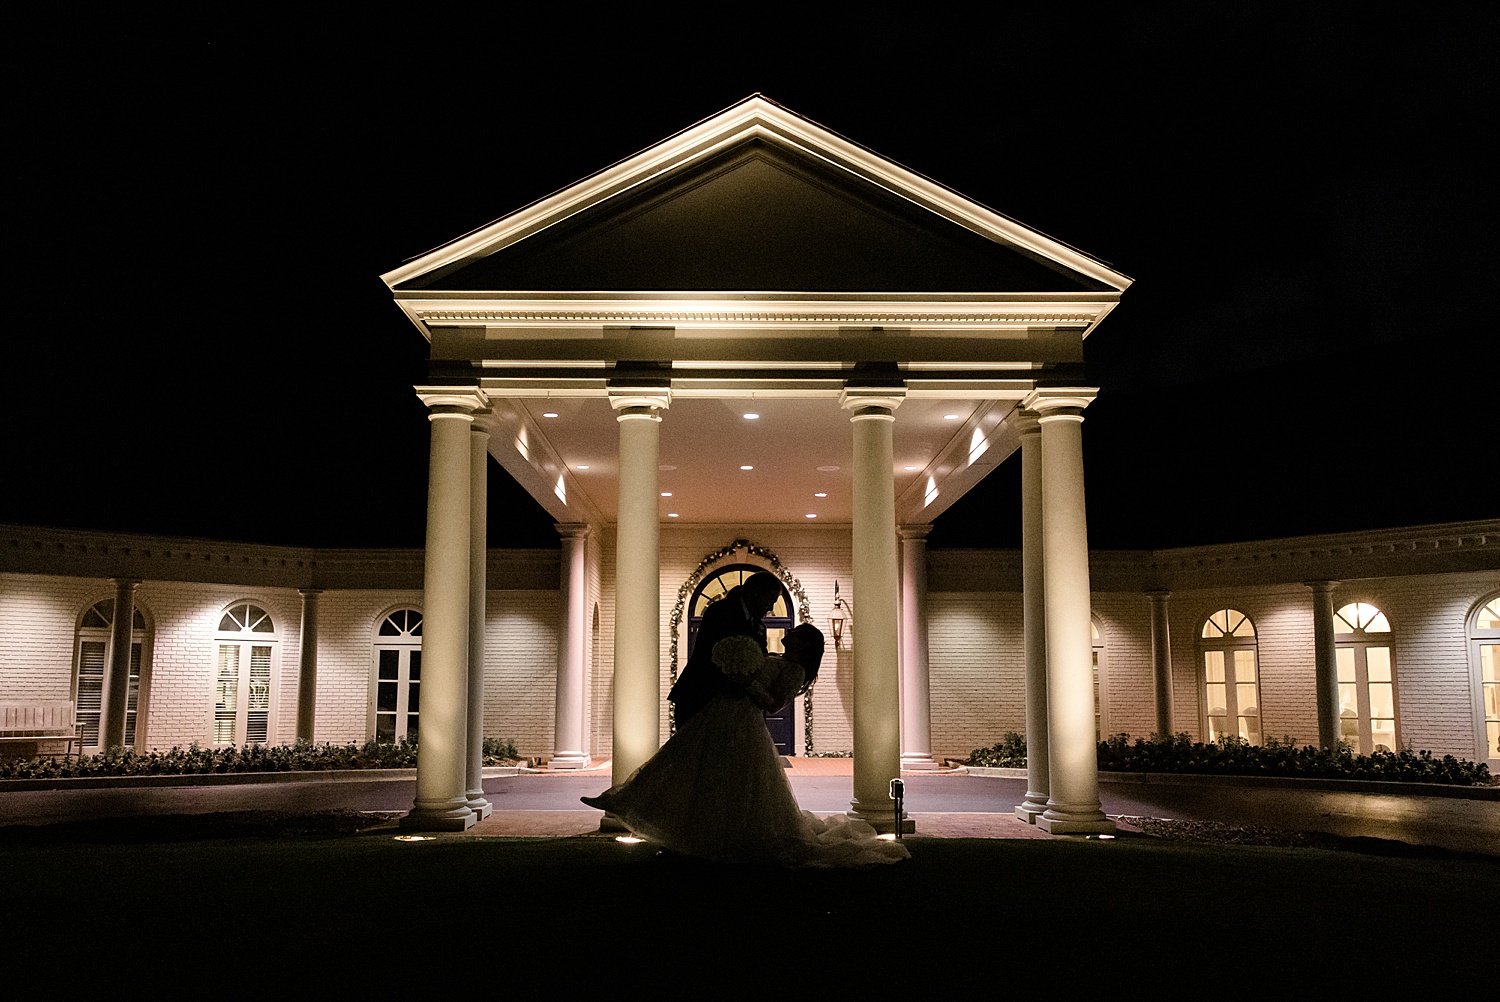 Romantic wedding venue lit up at night with the silhouette of the bride and groom 